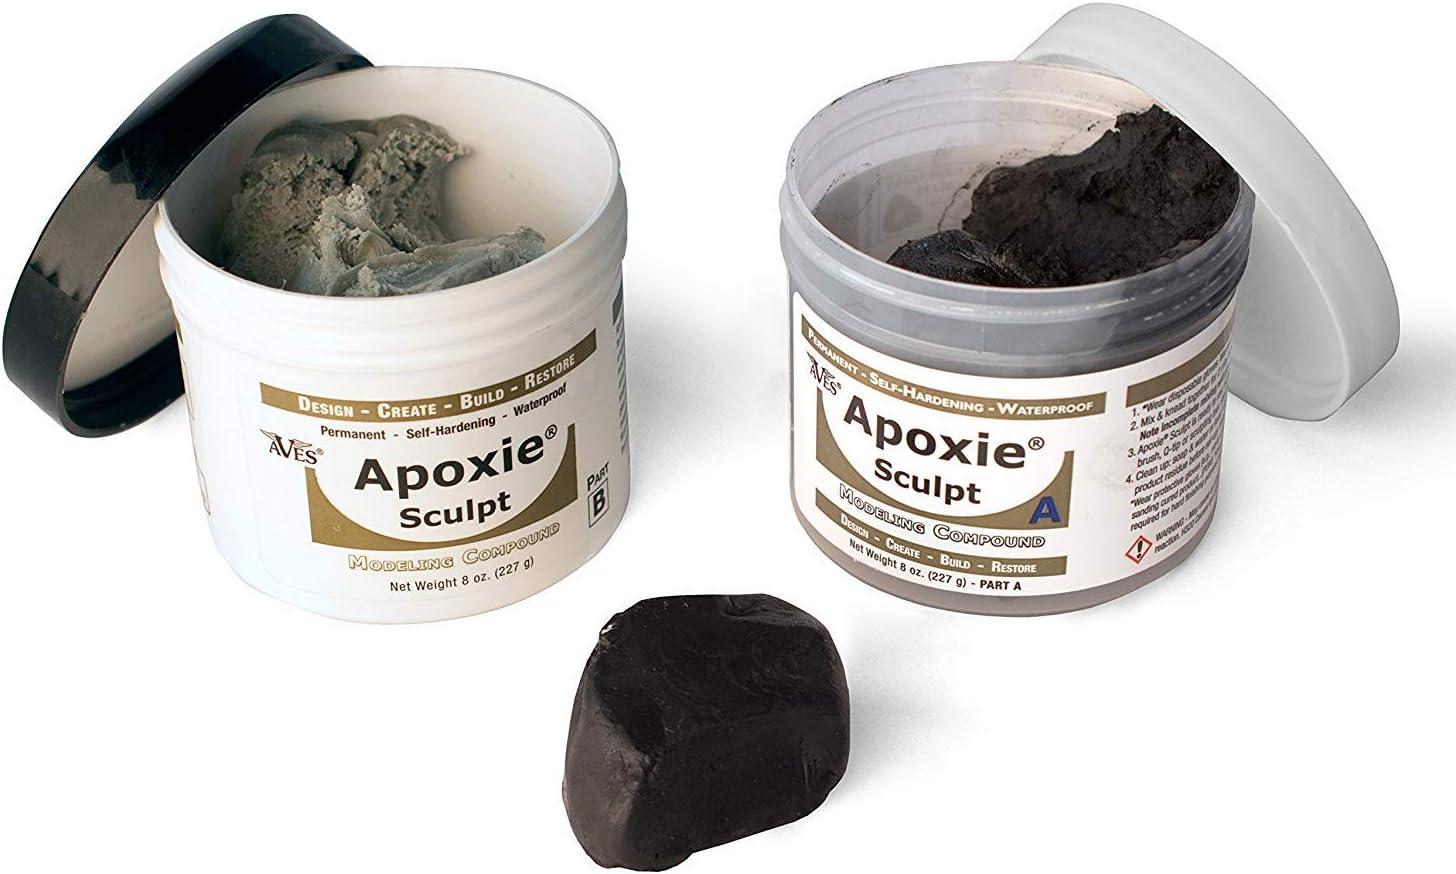 Catalog - Aves: Maker of Fine Clays and Maches, Apoxie Sculpt